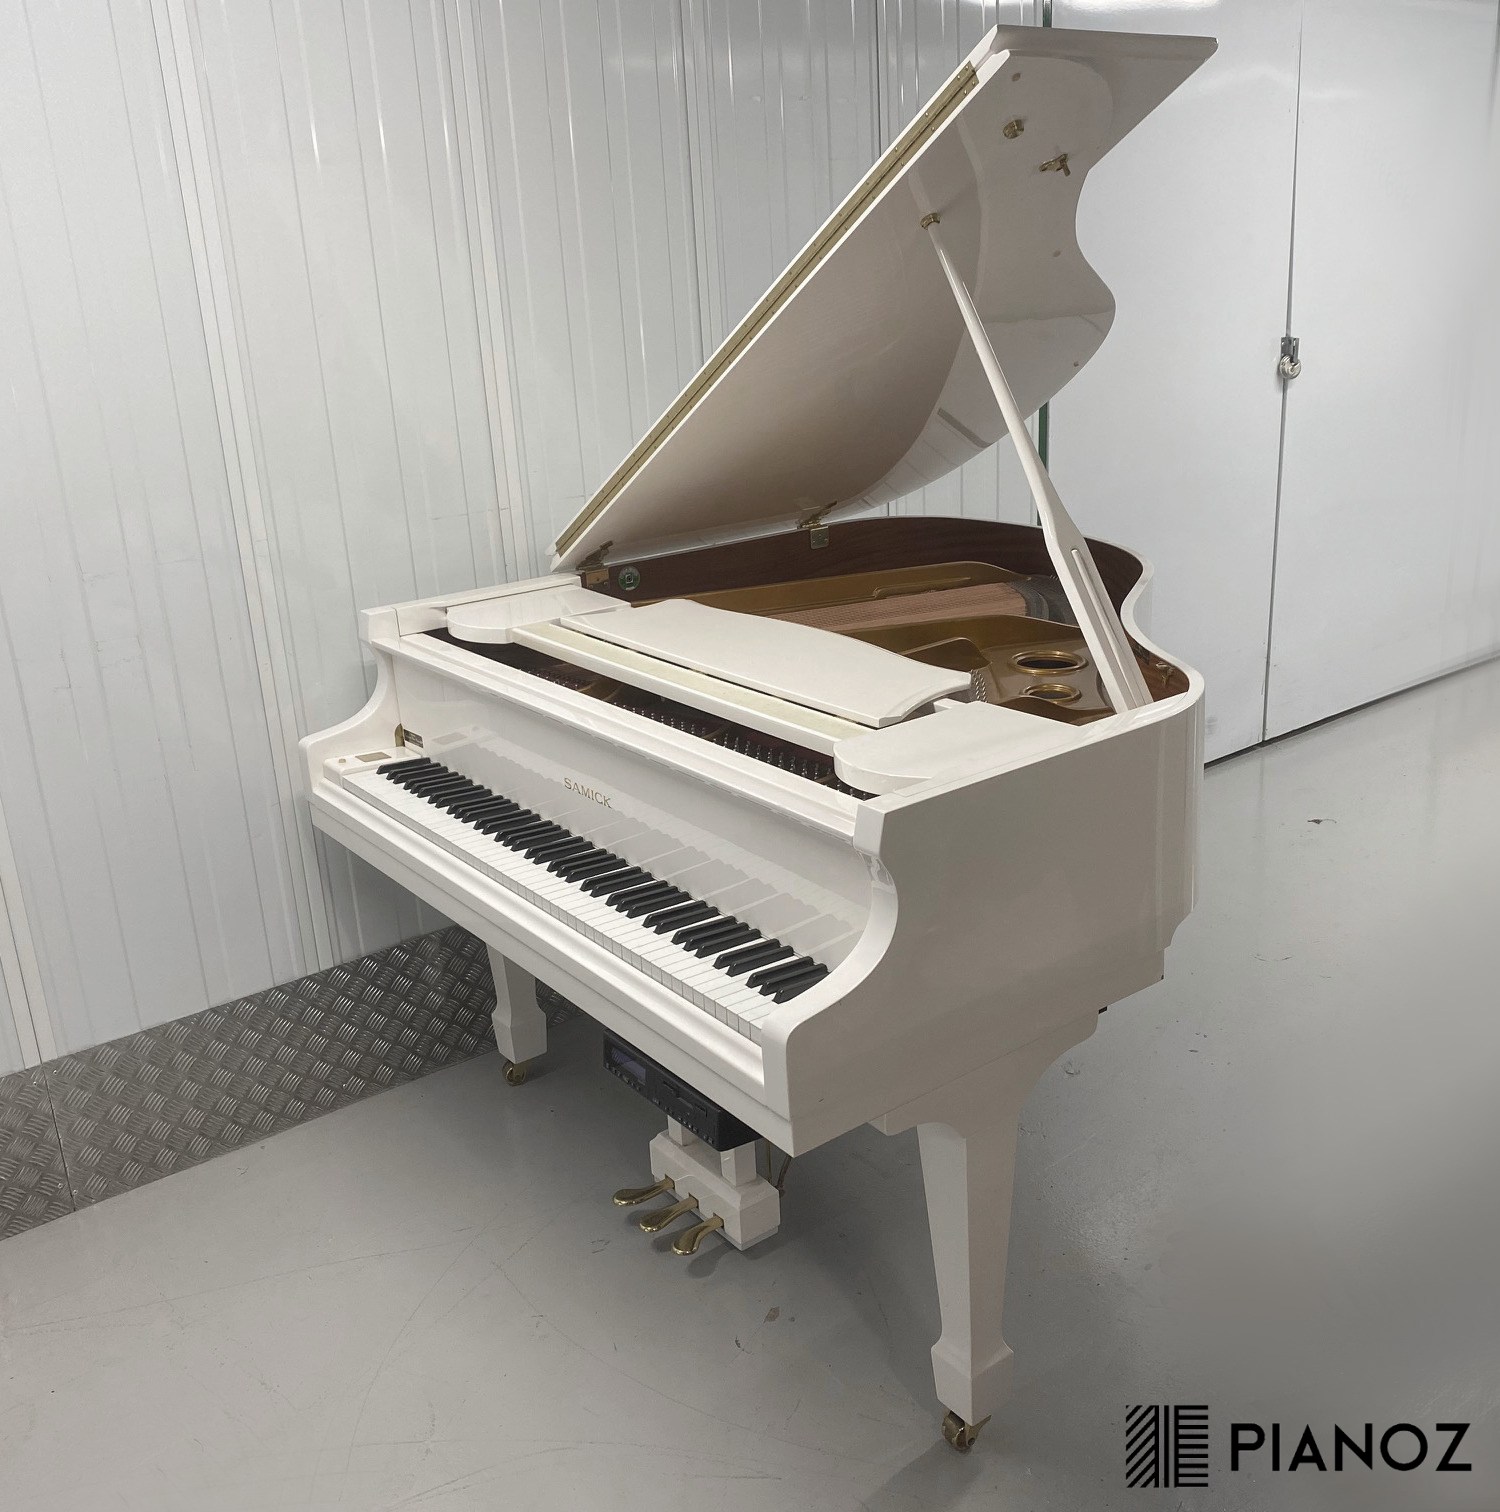 Samick Self Playing Baby Grand Piano piano for sale in UK